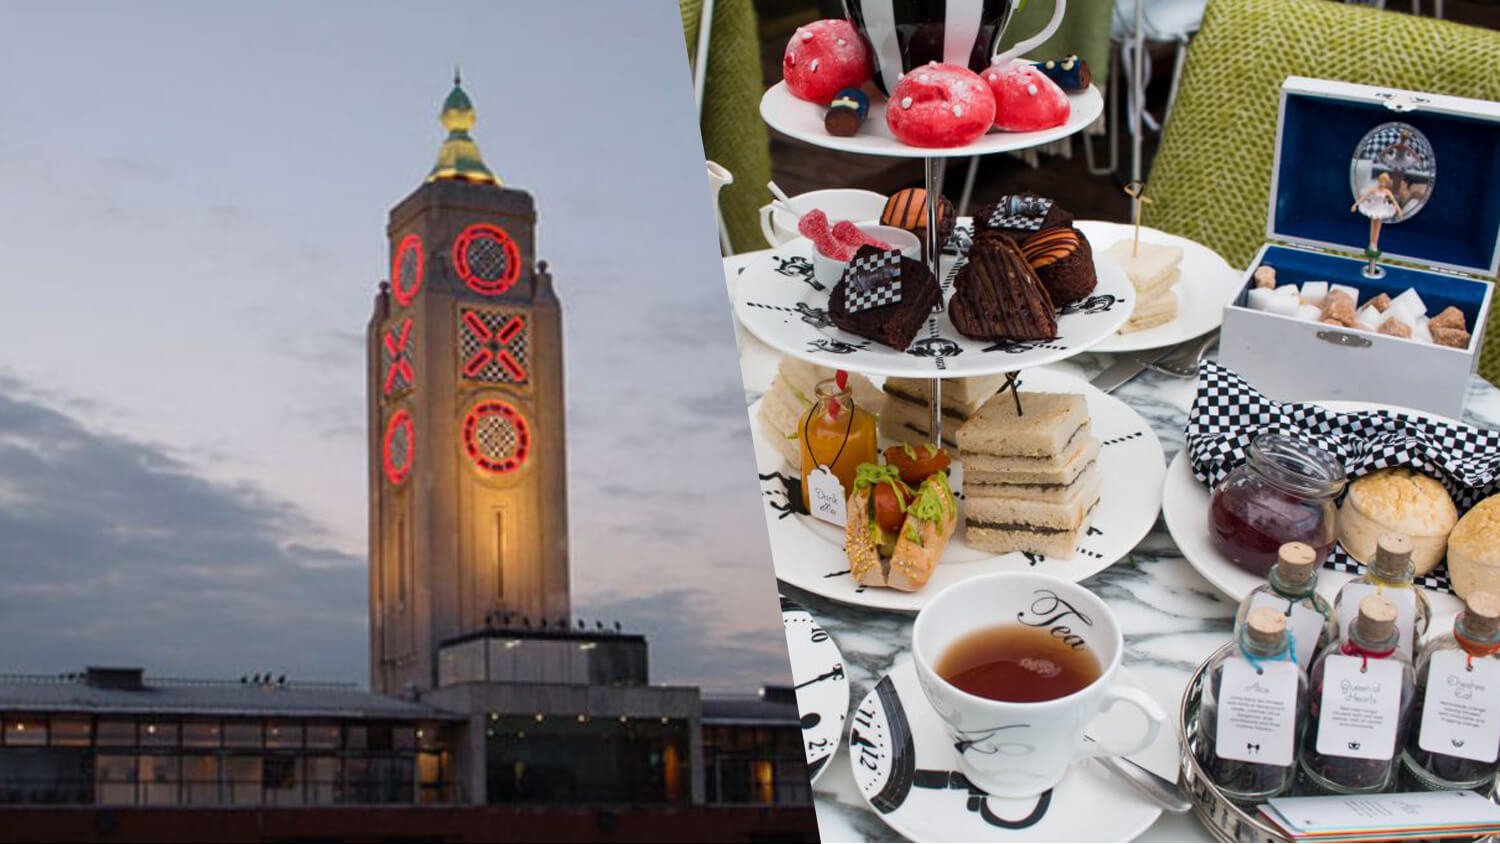 London's OXO Tower Launches Vegan Afternoon Tea Featuring Scones, Clotted  Dairy-Free Cream and Cheese Sandwiches